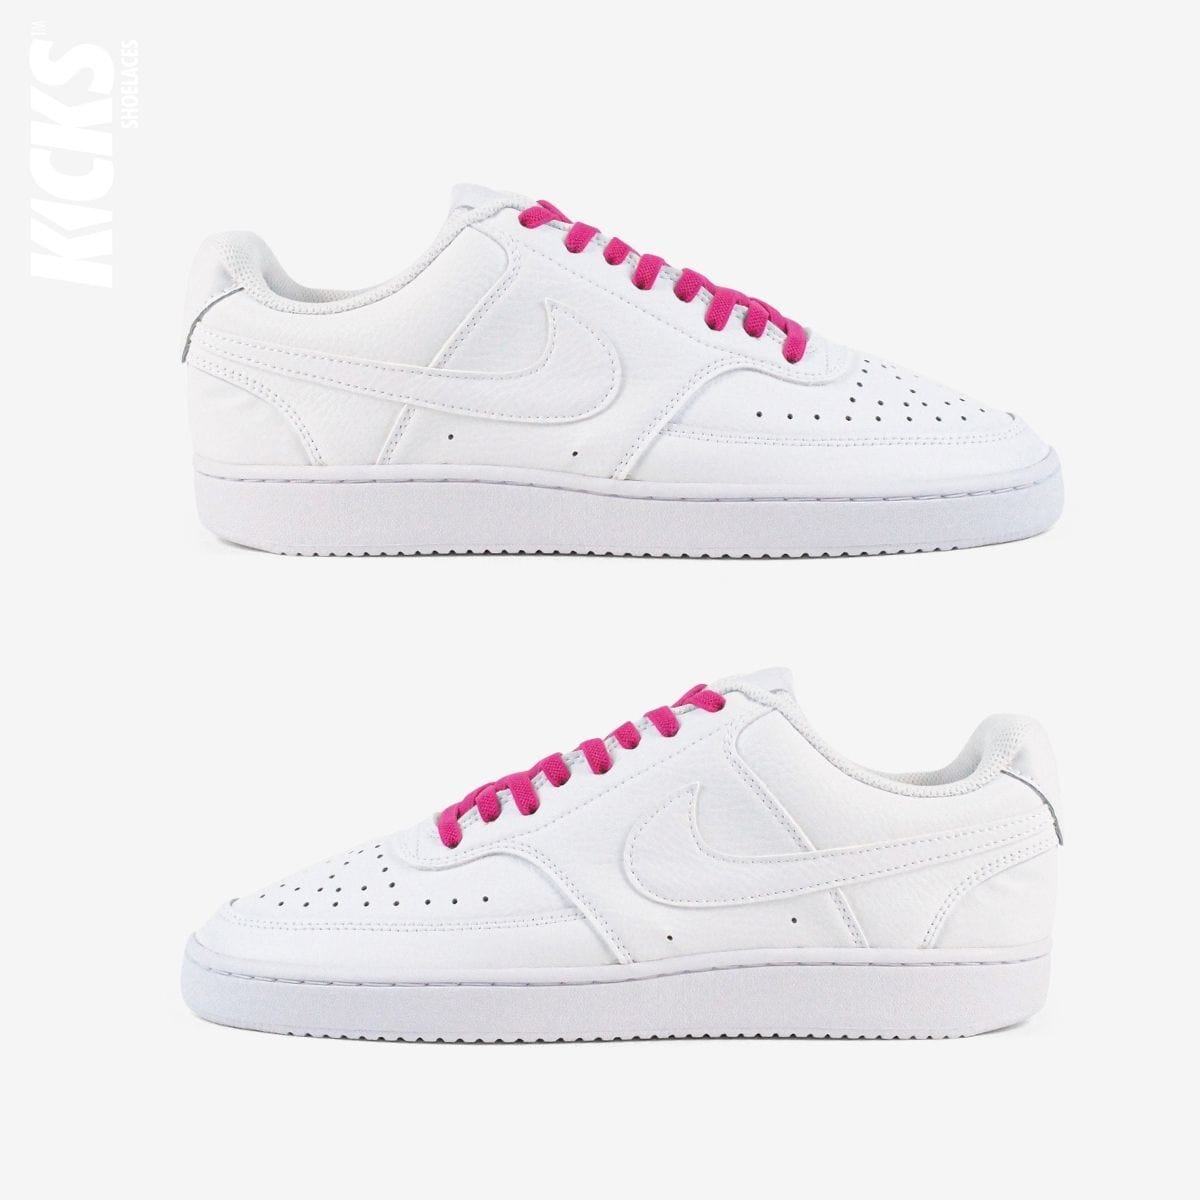 tieless-laces-with-rose-pink-laces-on-nike-white-sneakers-by-kicks-shoelaces